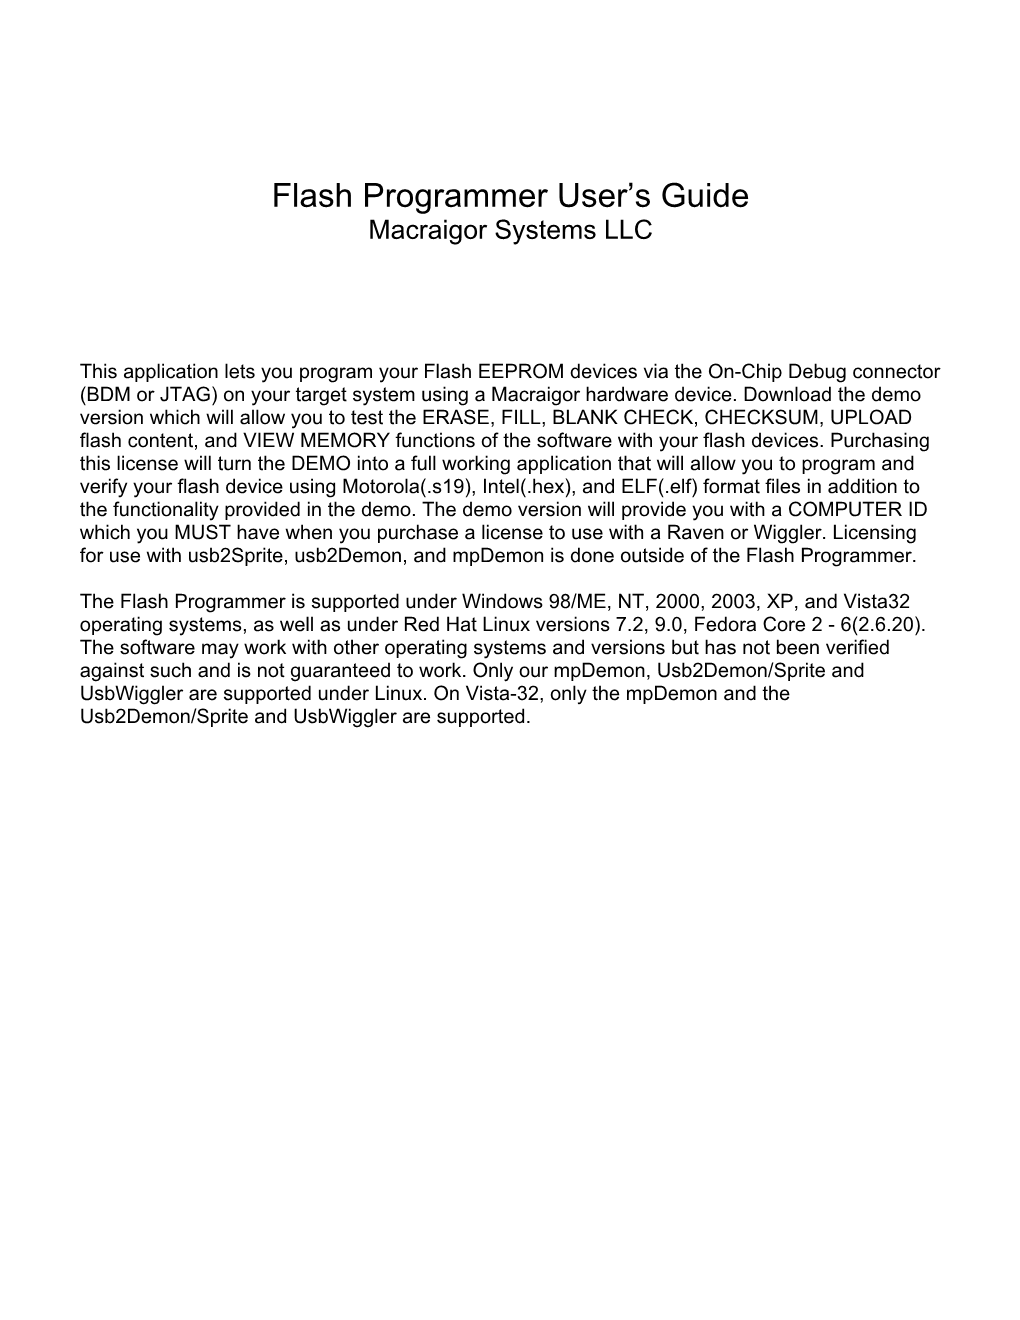 The OCD Flash Programmer Provides In-Circuit Programming